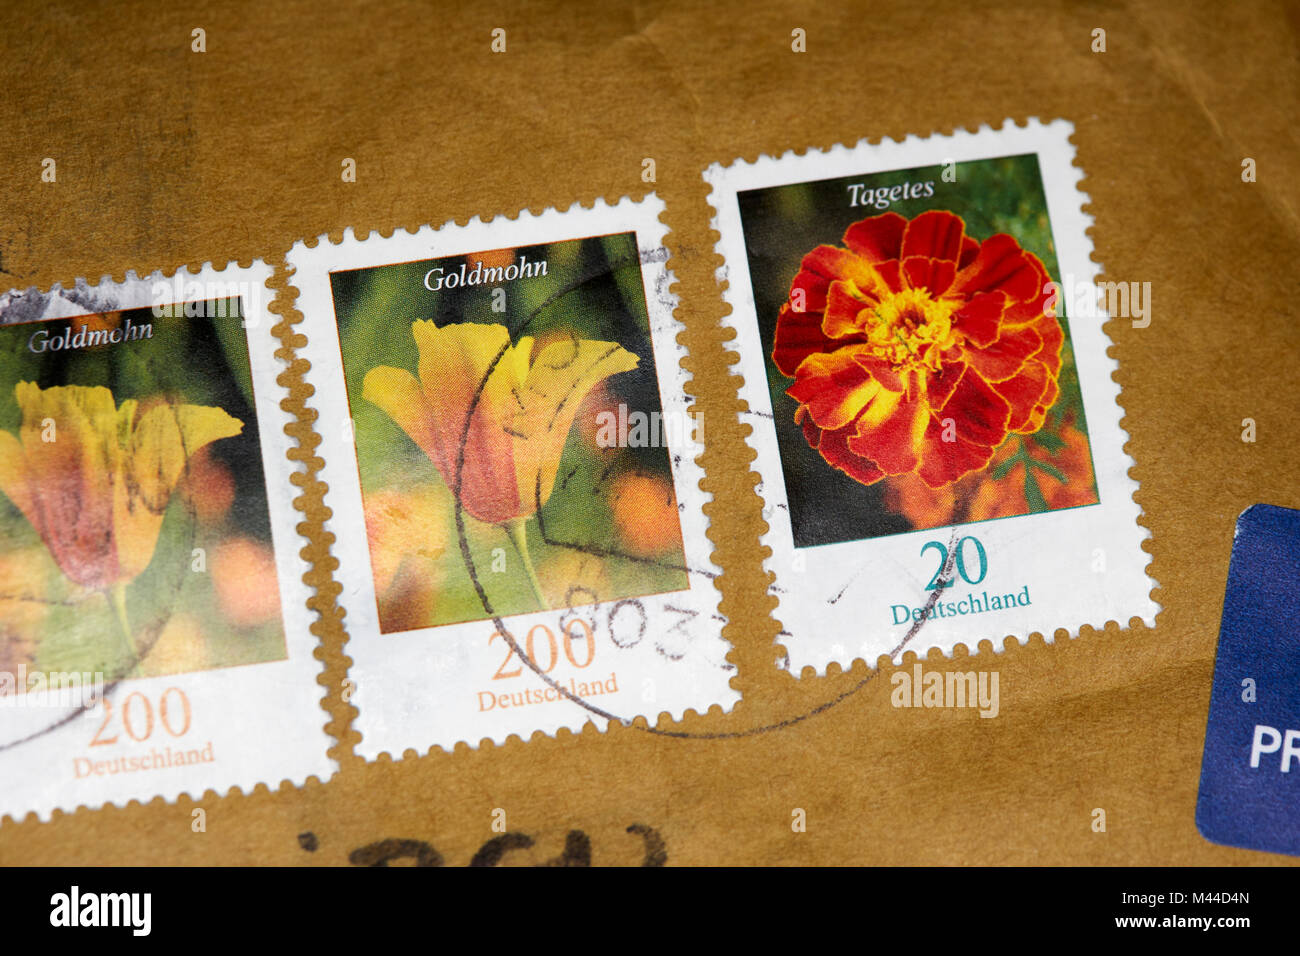 postmark and stamps on a small packet sent from Germany Stock Photo